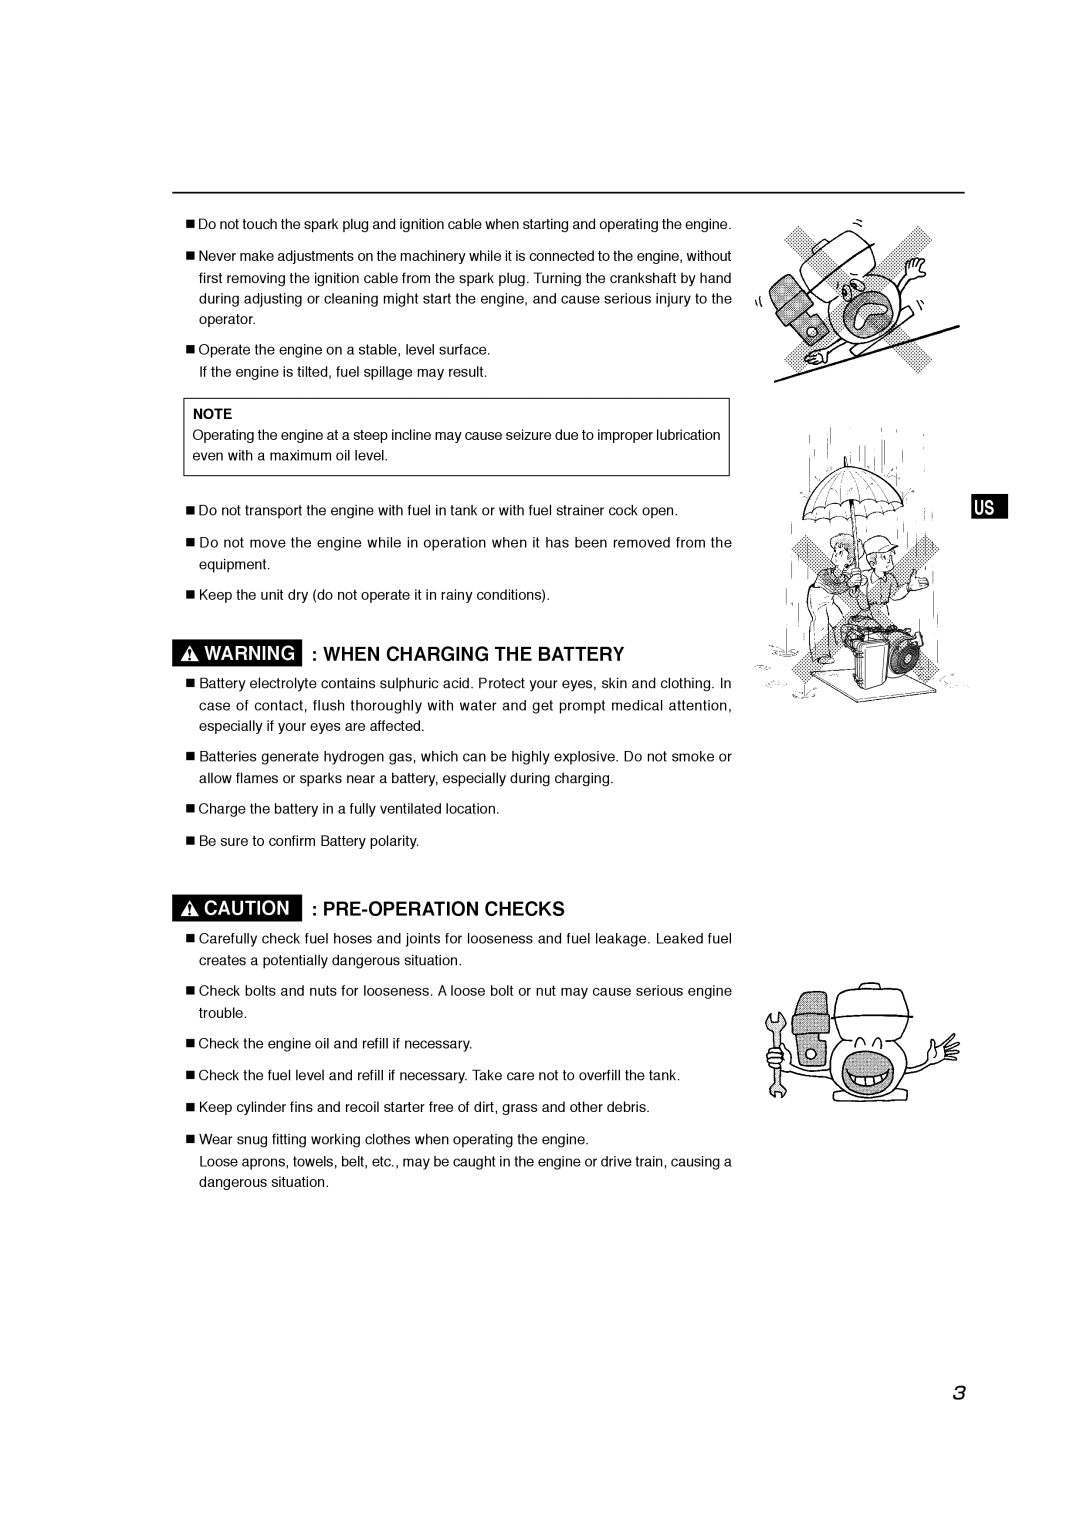 Subaru Robin Power Products EX30 manual Warning When Charging The Battery, Caution Pre-Operation Checks 